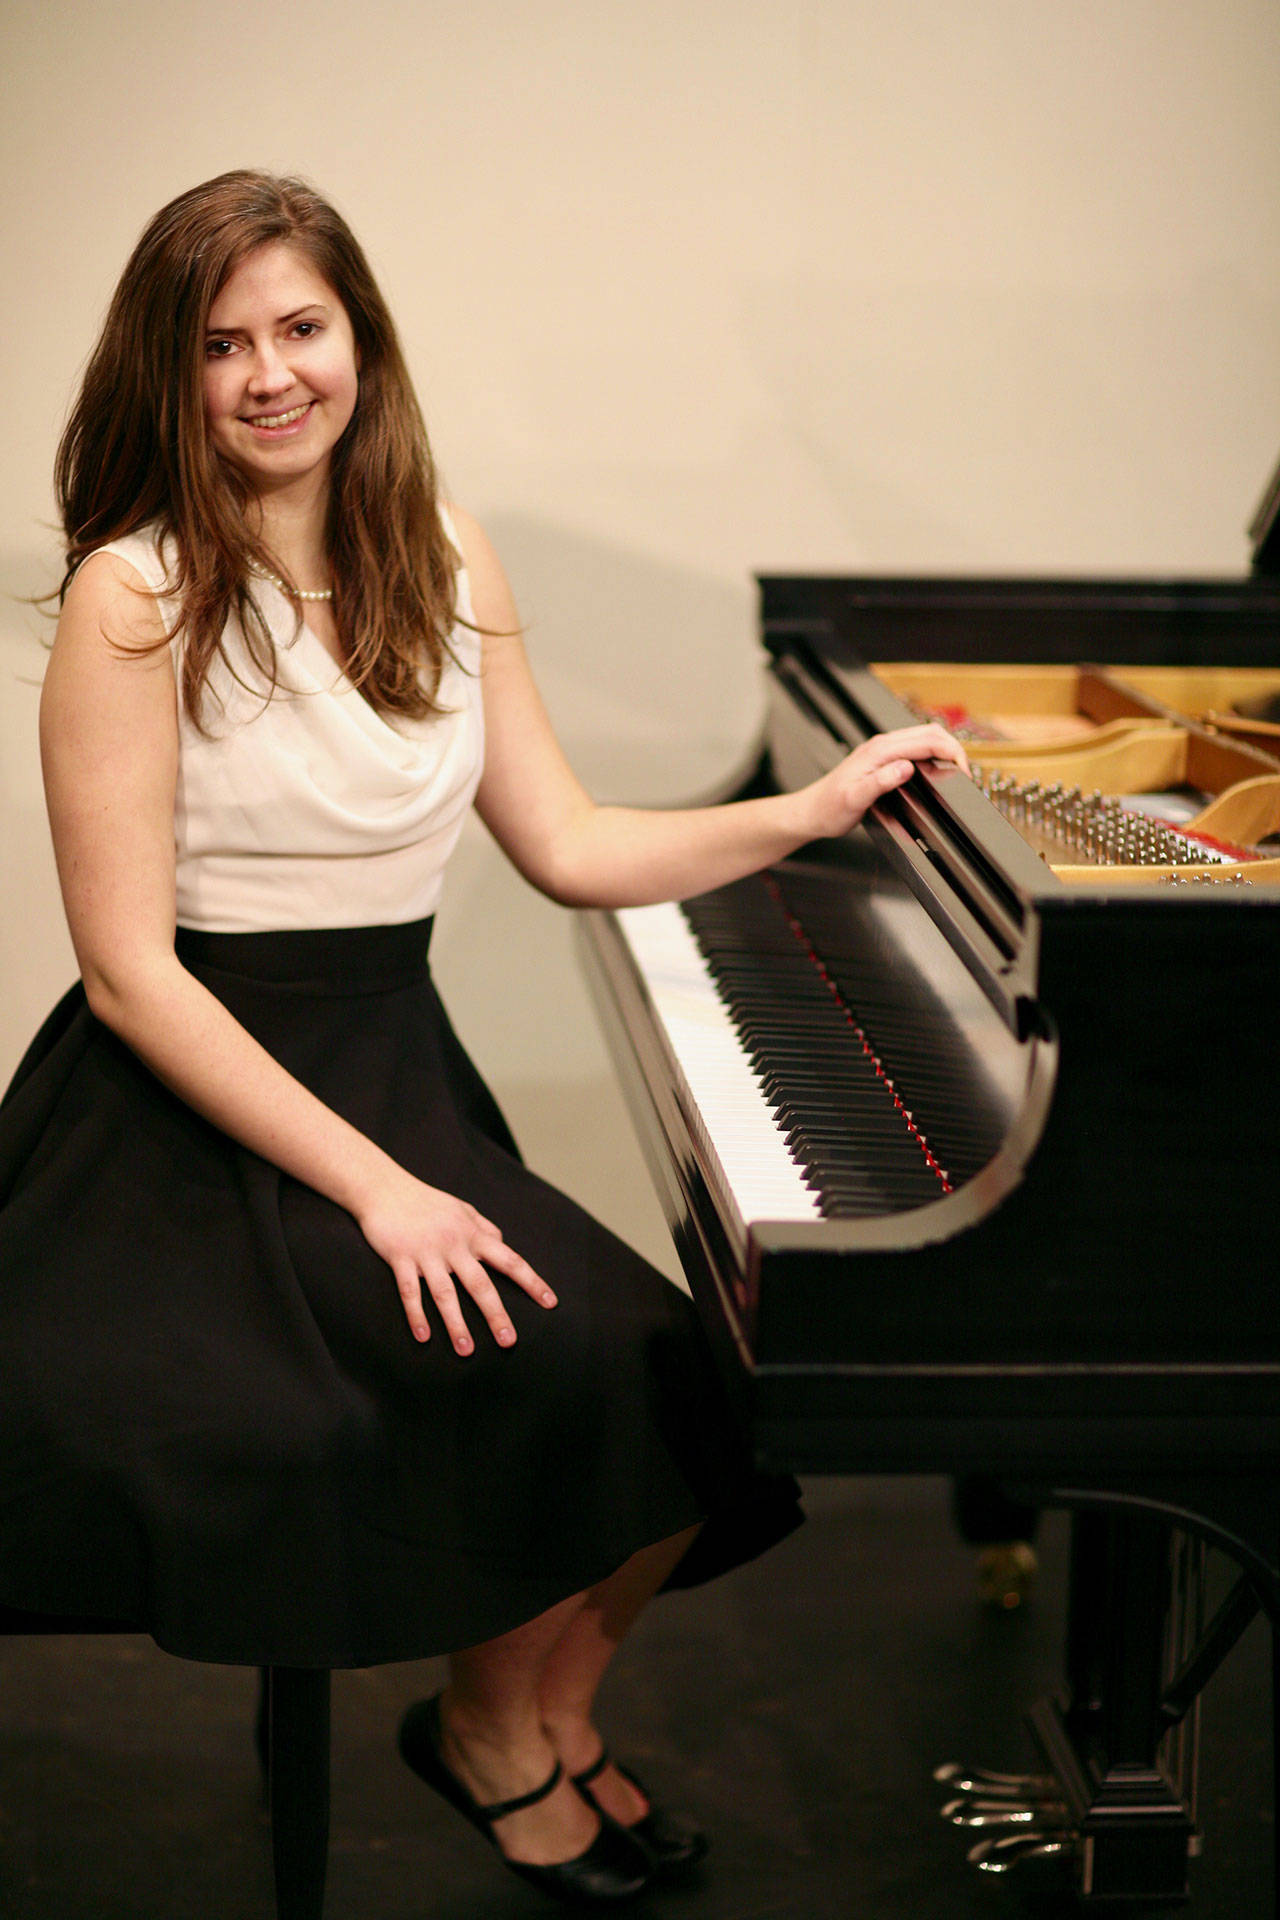 Heidi Fivash, a classical pianist and soprano, performs at 1 p.m. Tuesday, May 14, at St. Luke’s Episcopal Church’s Music Live at One. Photo courtesy of Heidi Fivash